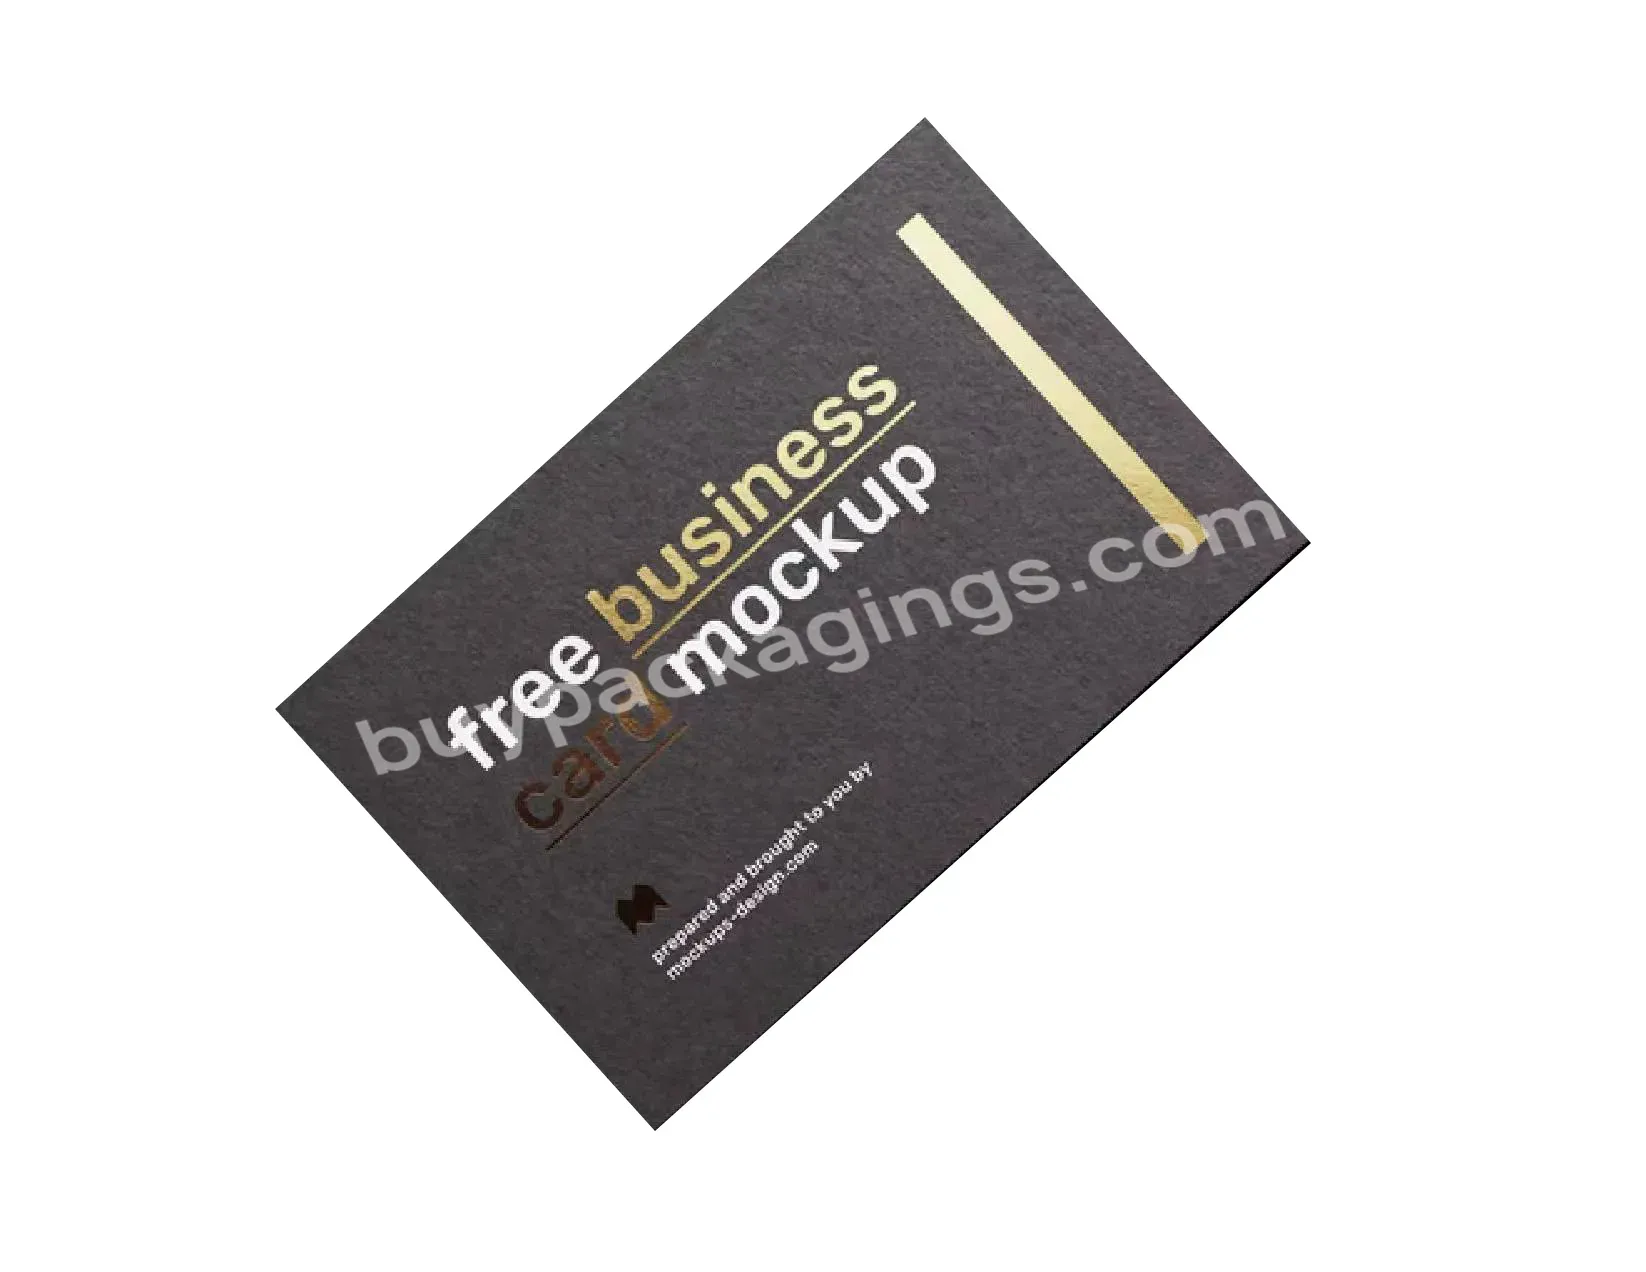 Custom Business Cards Paper Cards Printing For Business - Buy Buisness Cards,Greetings Cards,Paper Cards.